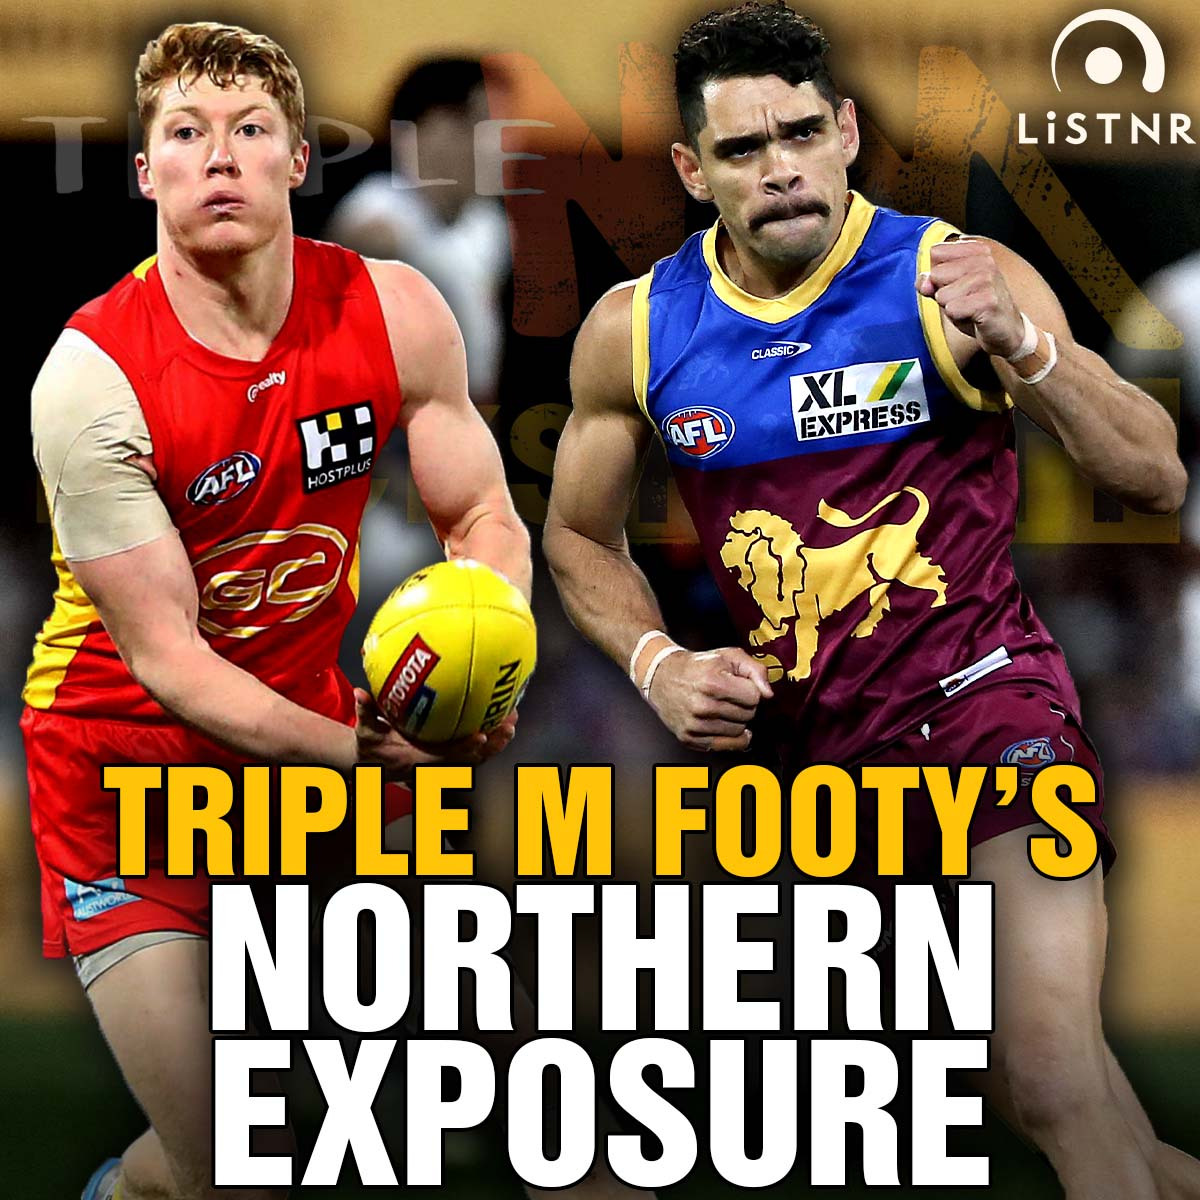 Northern Exposure | Simon Black's secret soccer match against Robbie Williams, Jarrod Witts flexes on the competition, McStay or McGo?